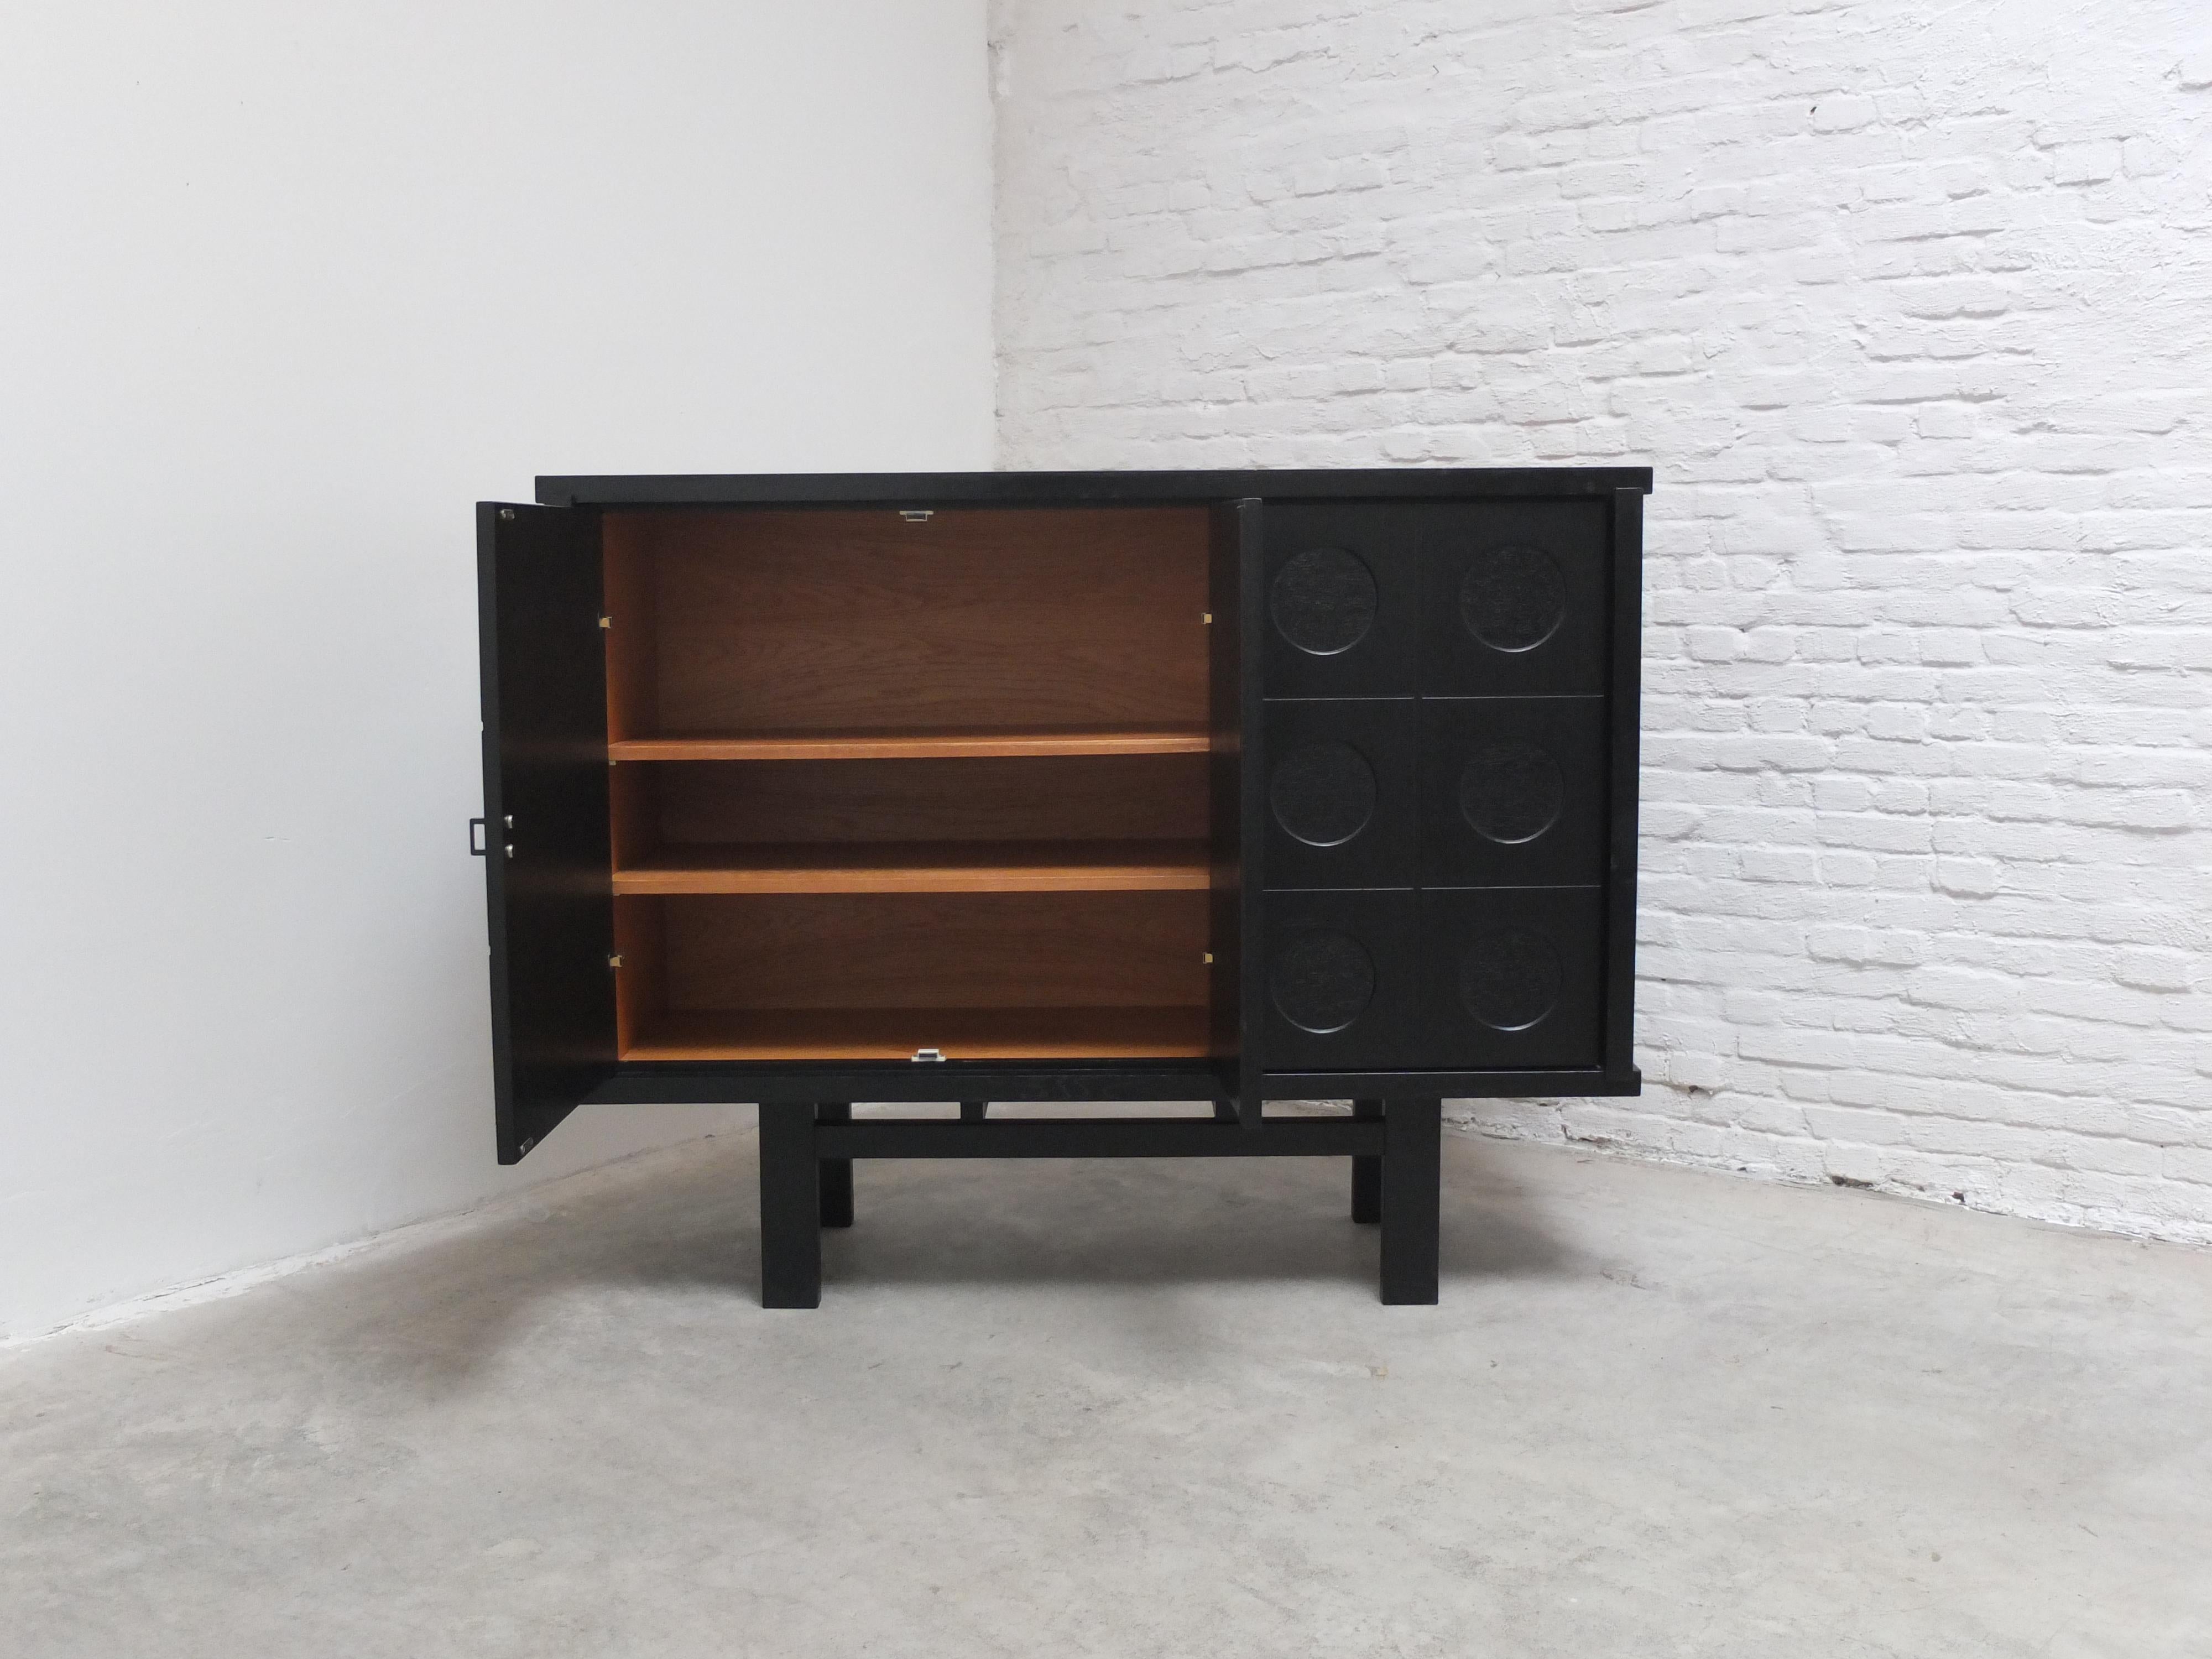 Belgian Graphical Cabinet in Black Stained Oak, 1970s For Sale 4